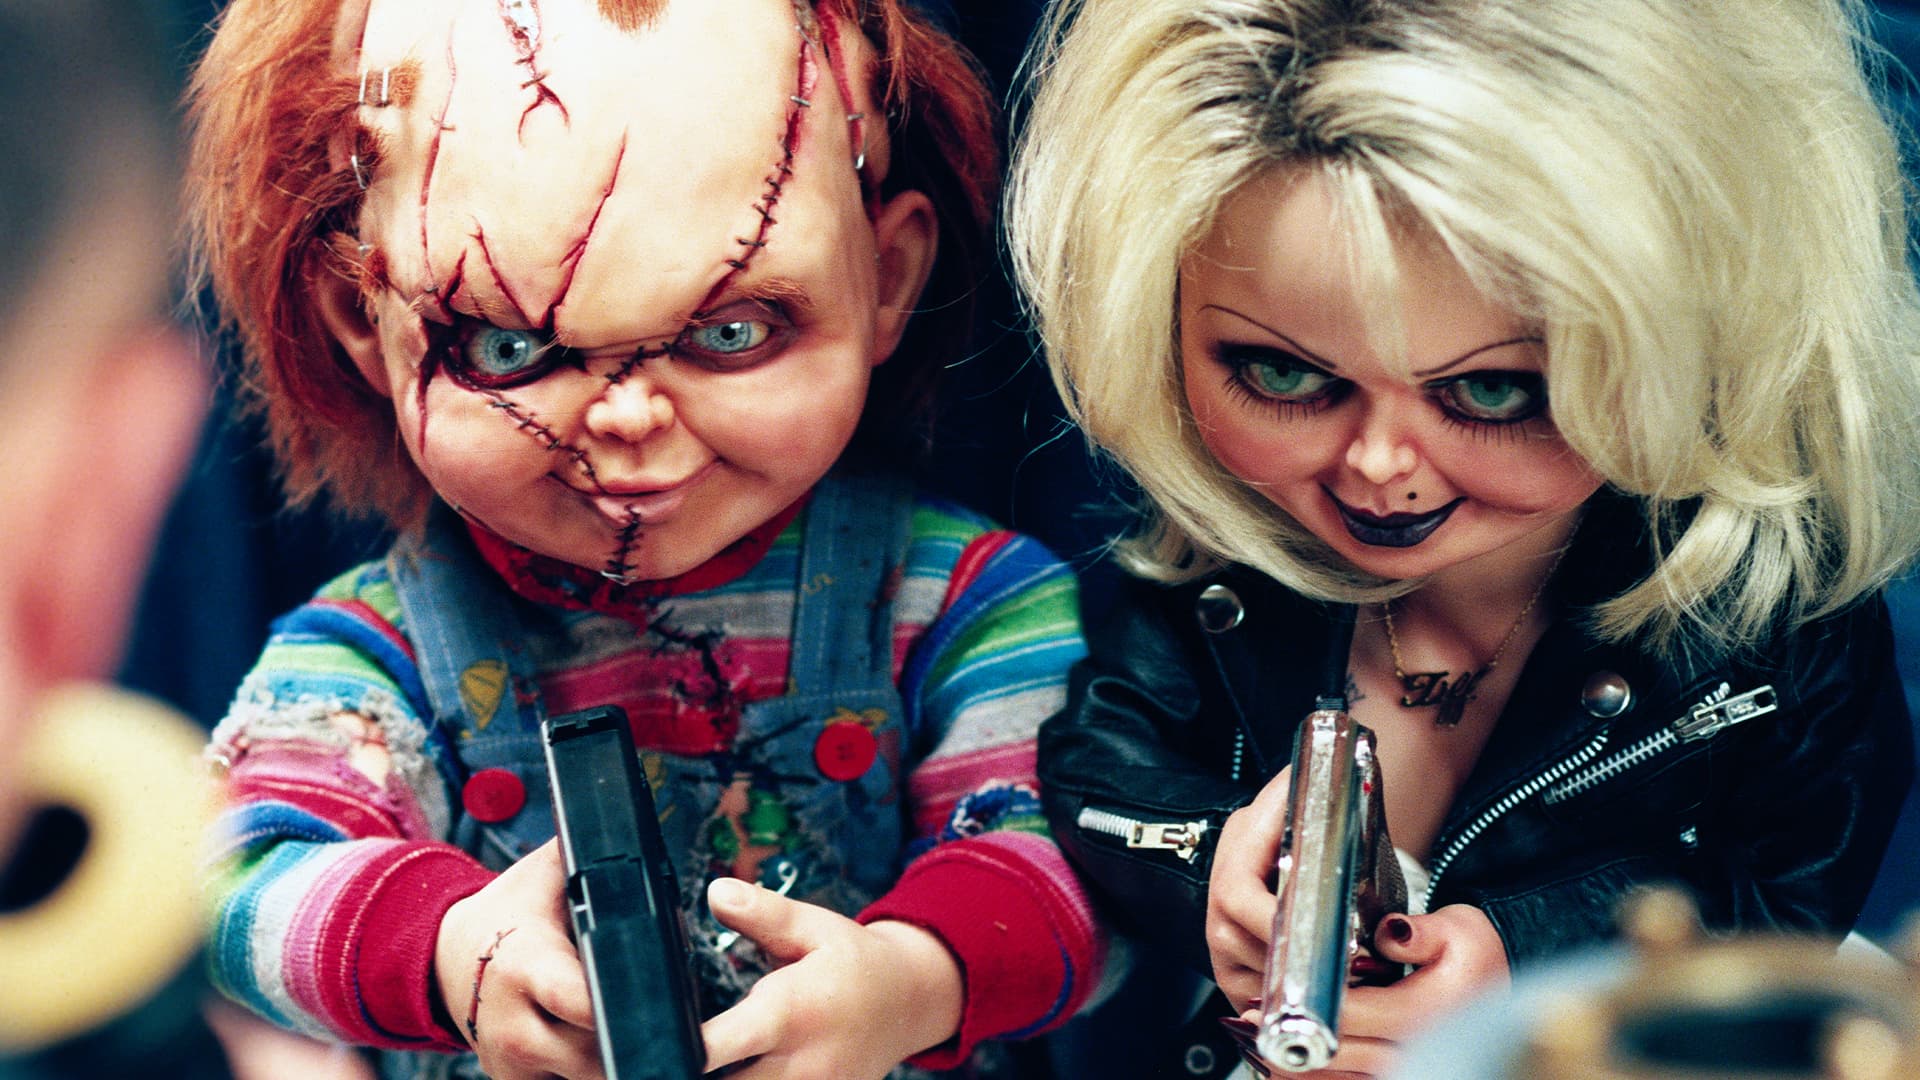 watch bride of chucky free online full movie